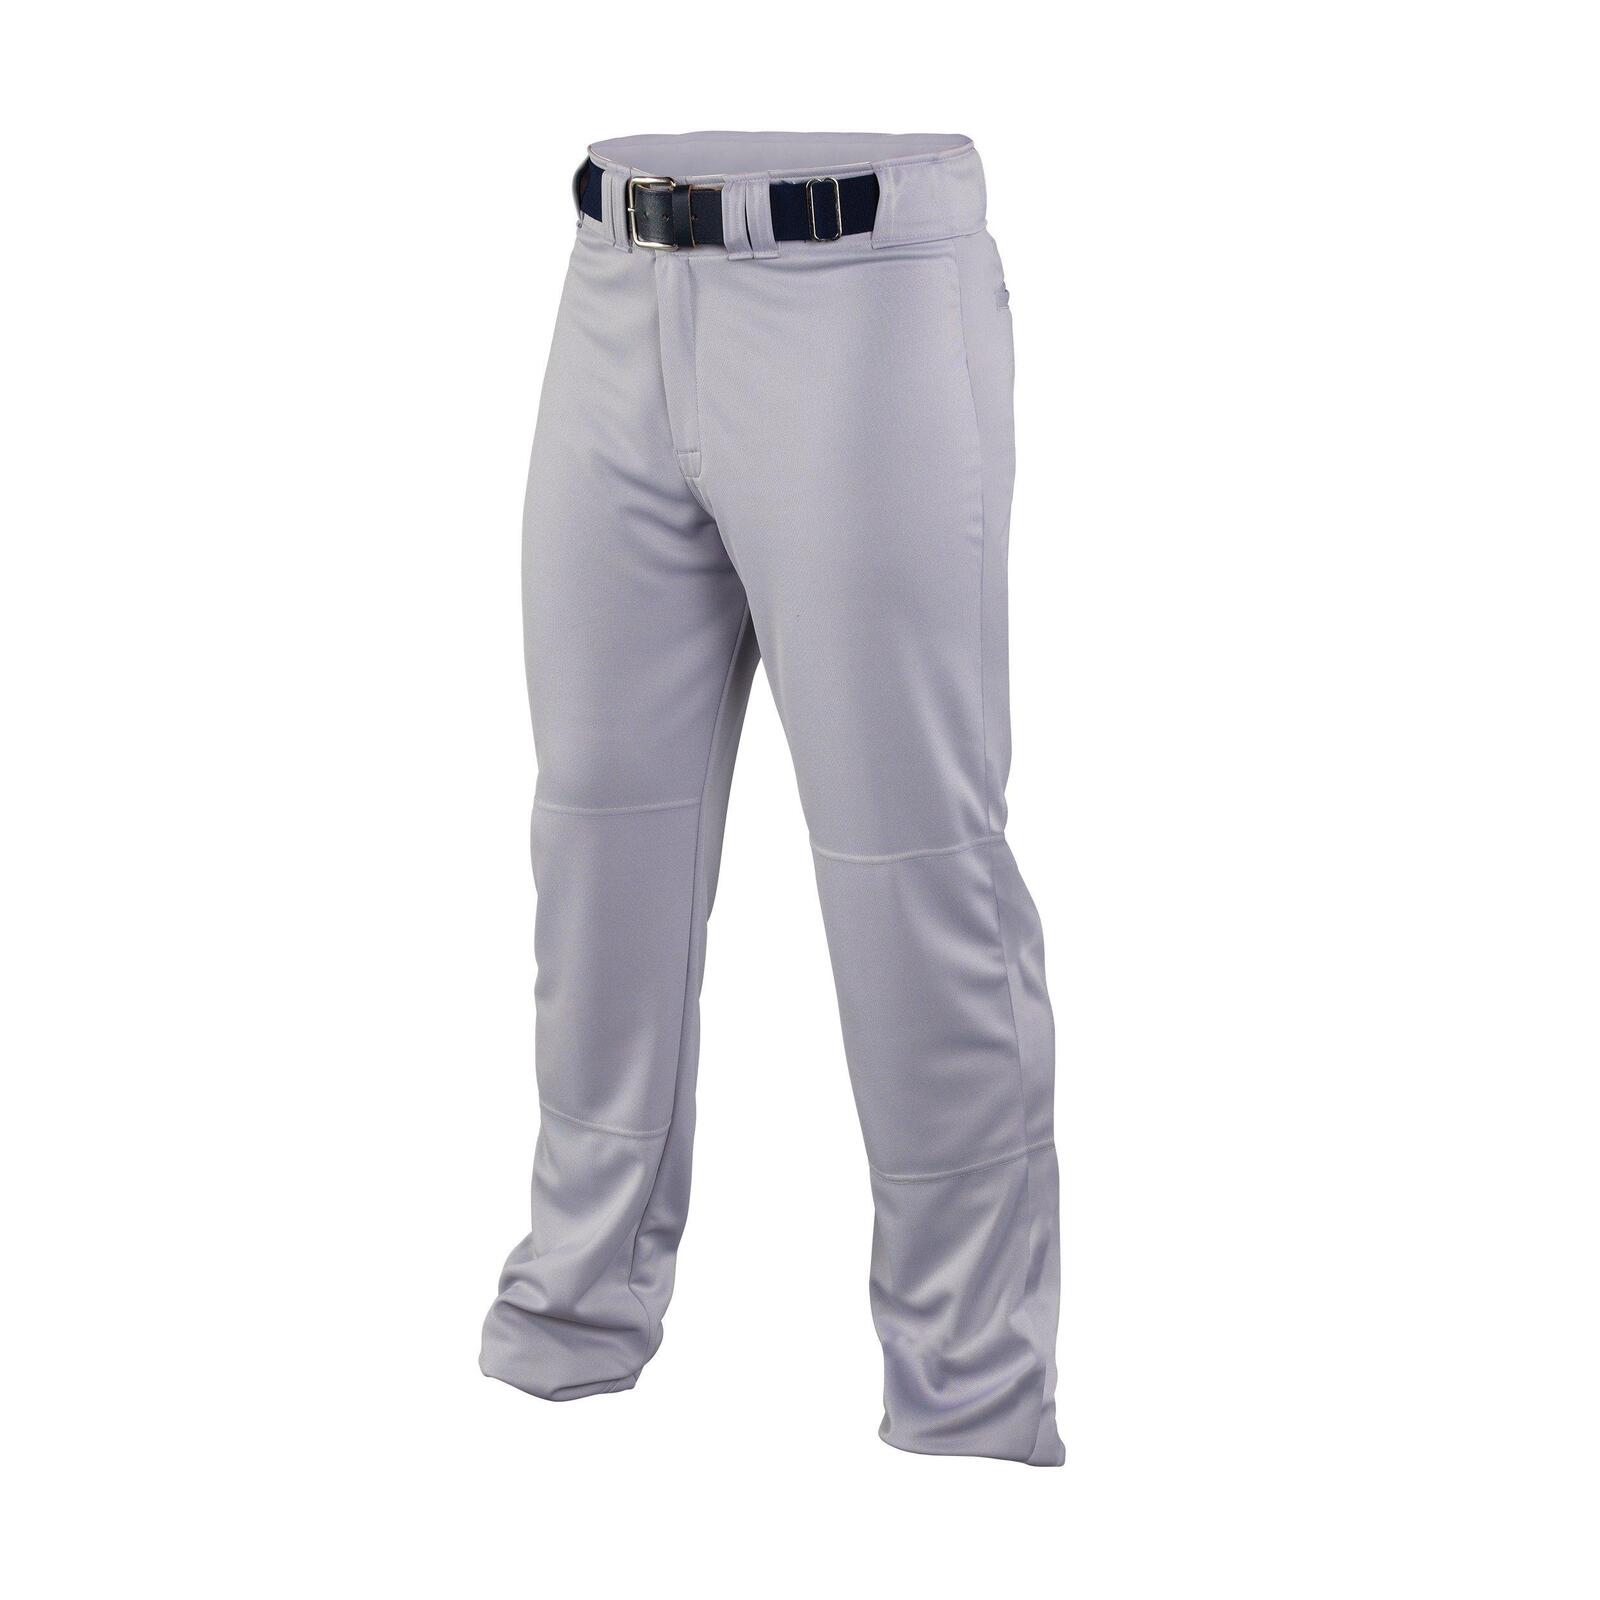 Easton Youth Deluxe Baseball Pant — DiscoSports, 46% OFF